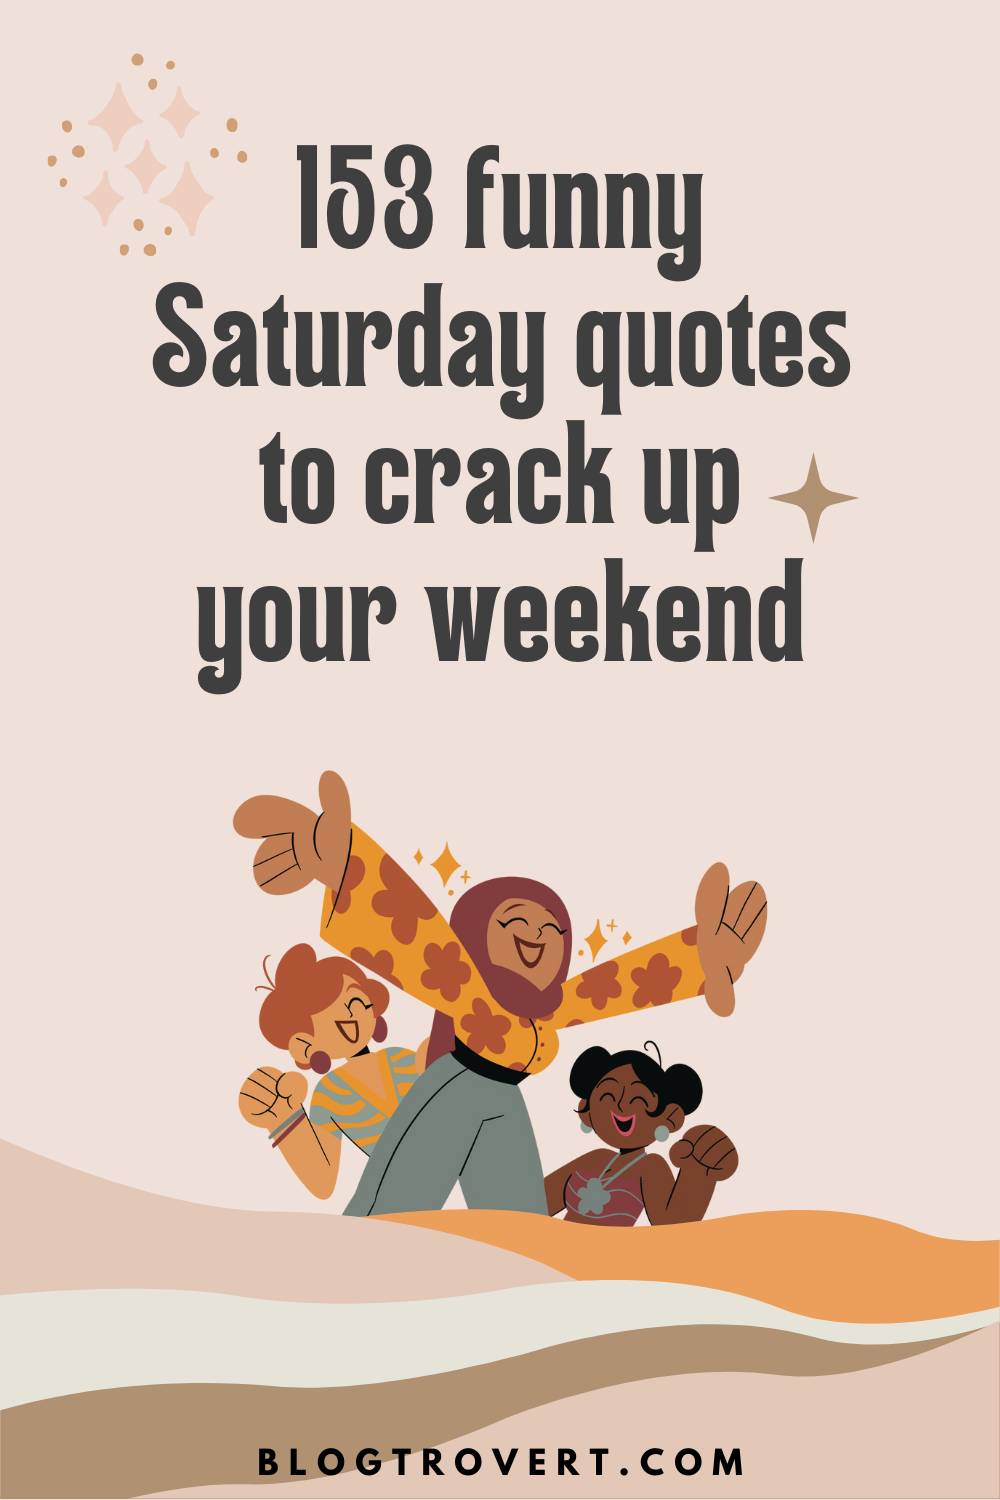 153 funny Saturday quotes to crack up your weekend 35